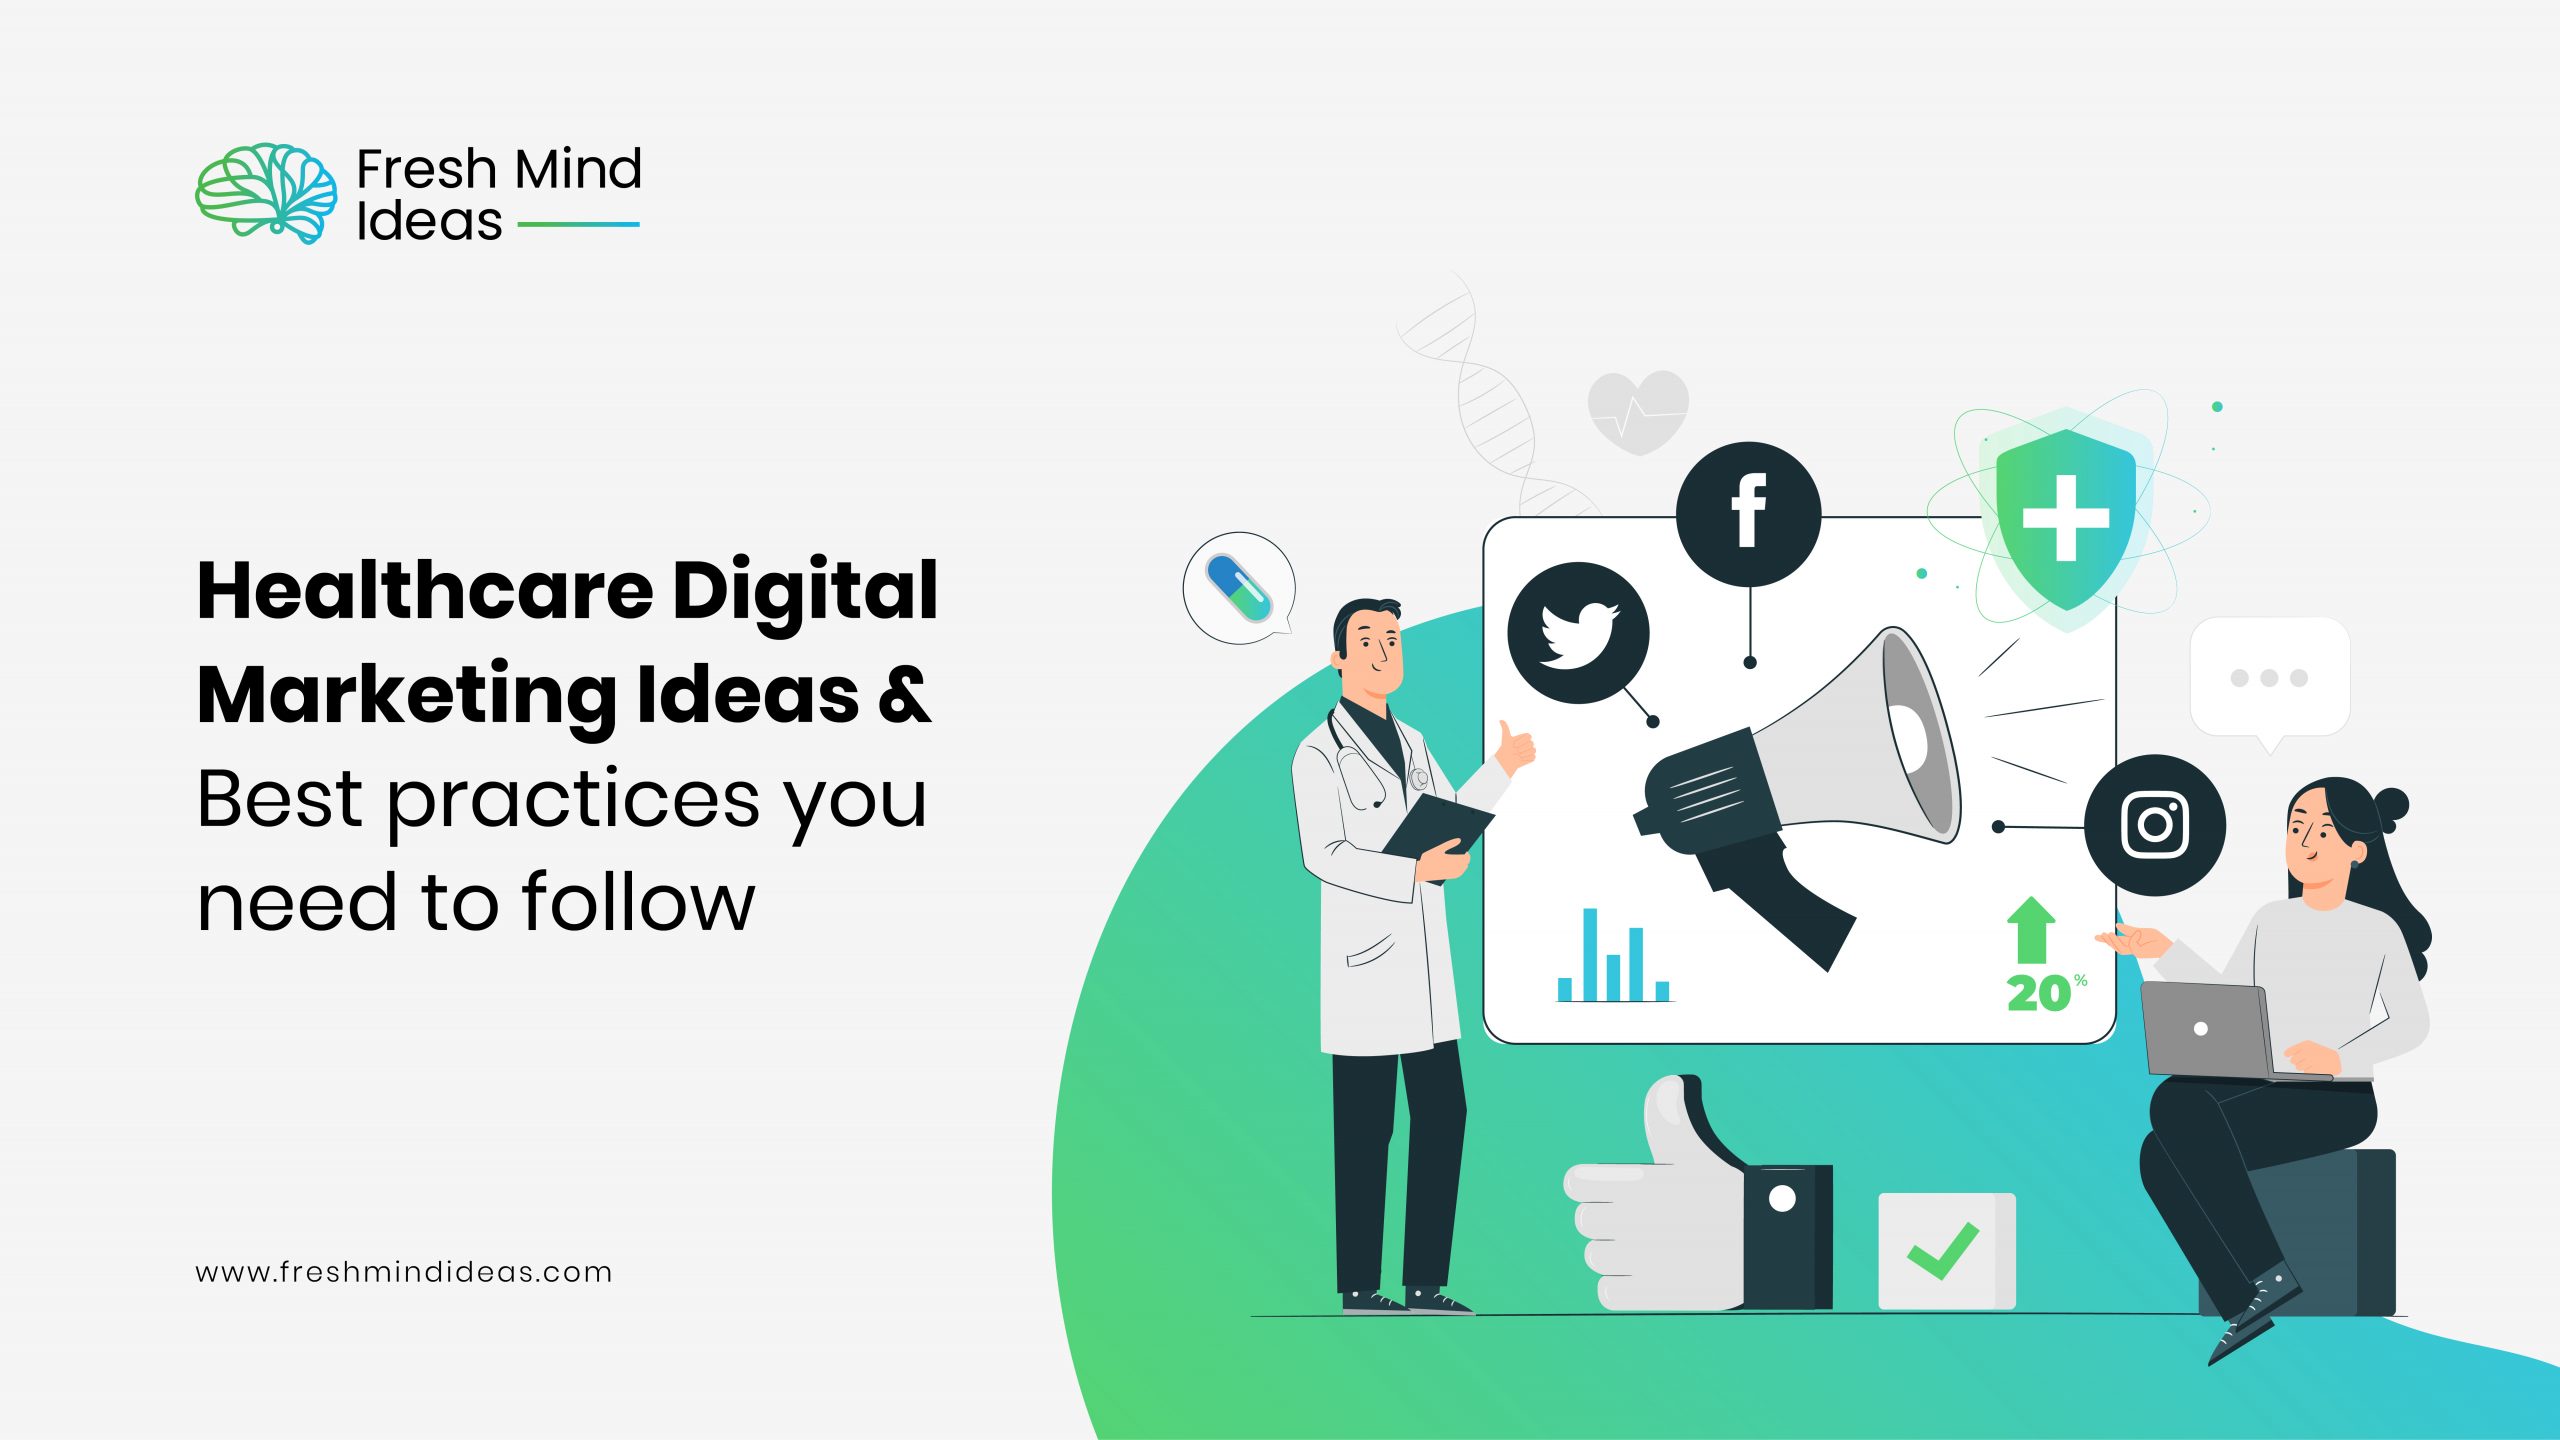 Healthcare Digital Marketing Ideas & Best practices you need to follow